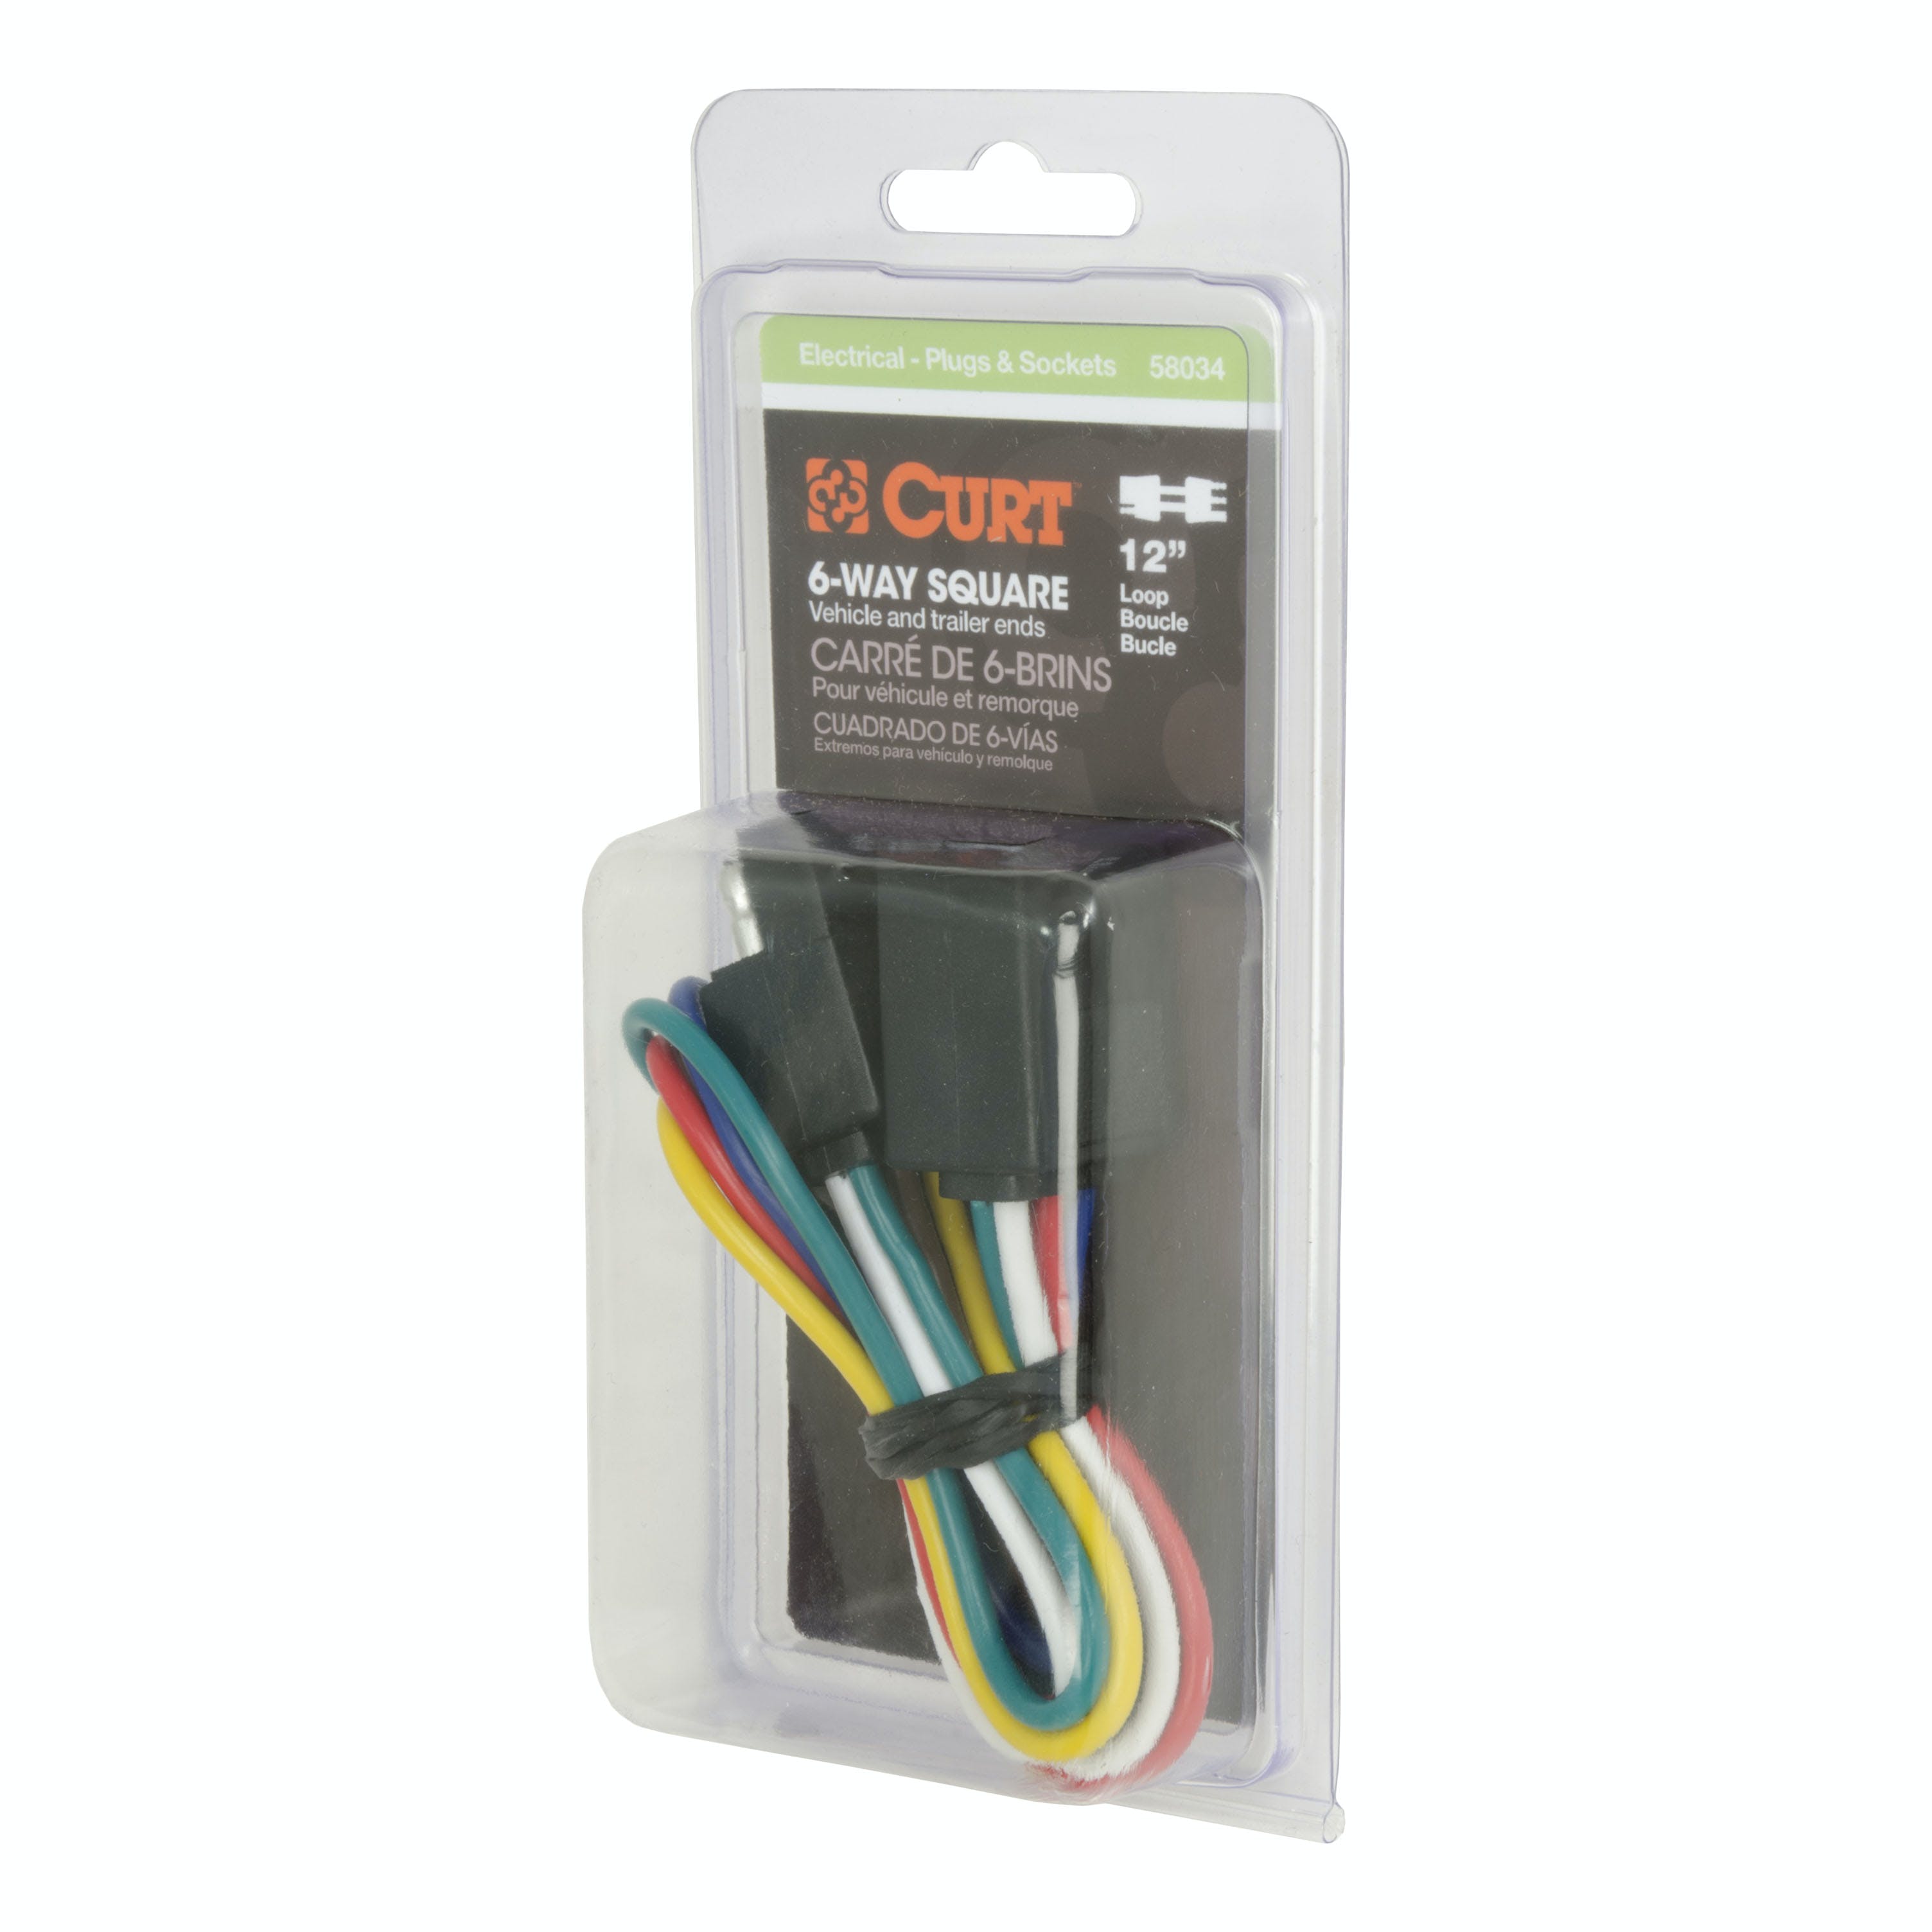 CURT 58034 6-Way Square Connector Plug and Socket with 12 Wires (Packaged)